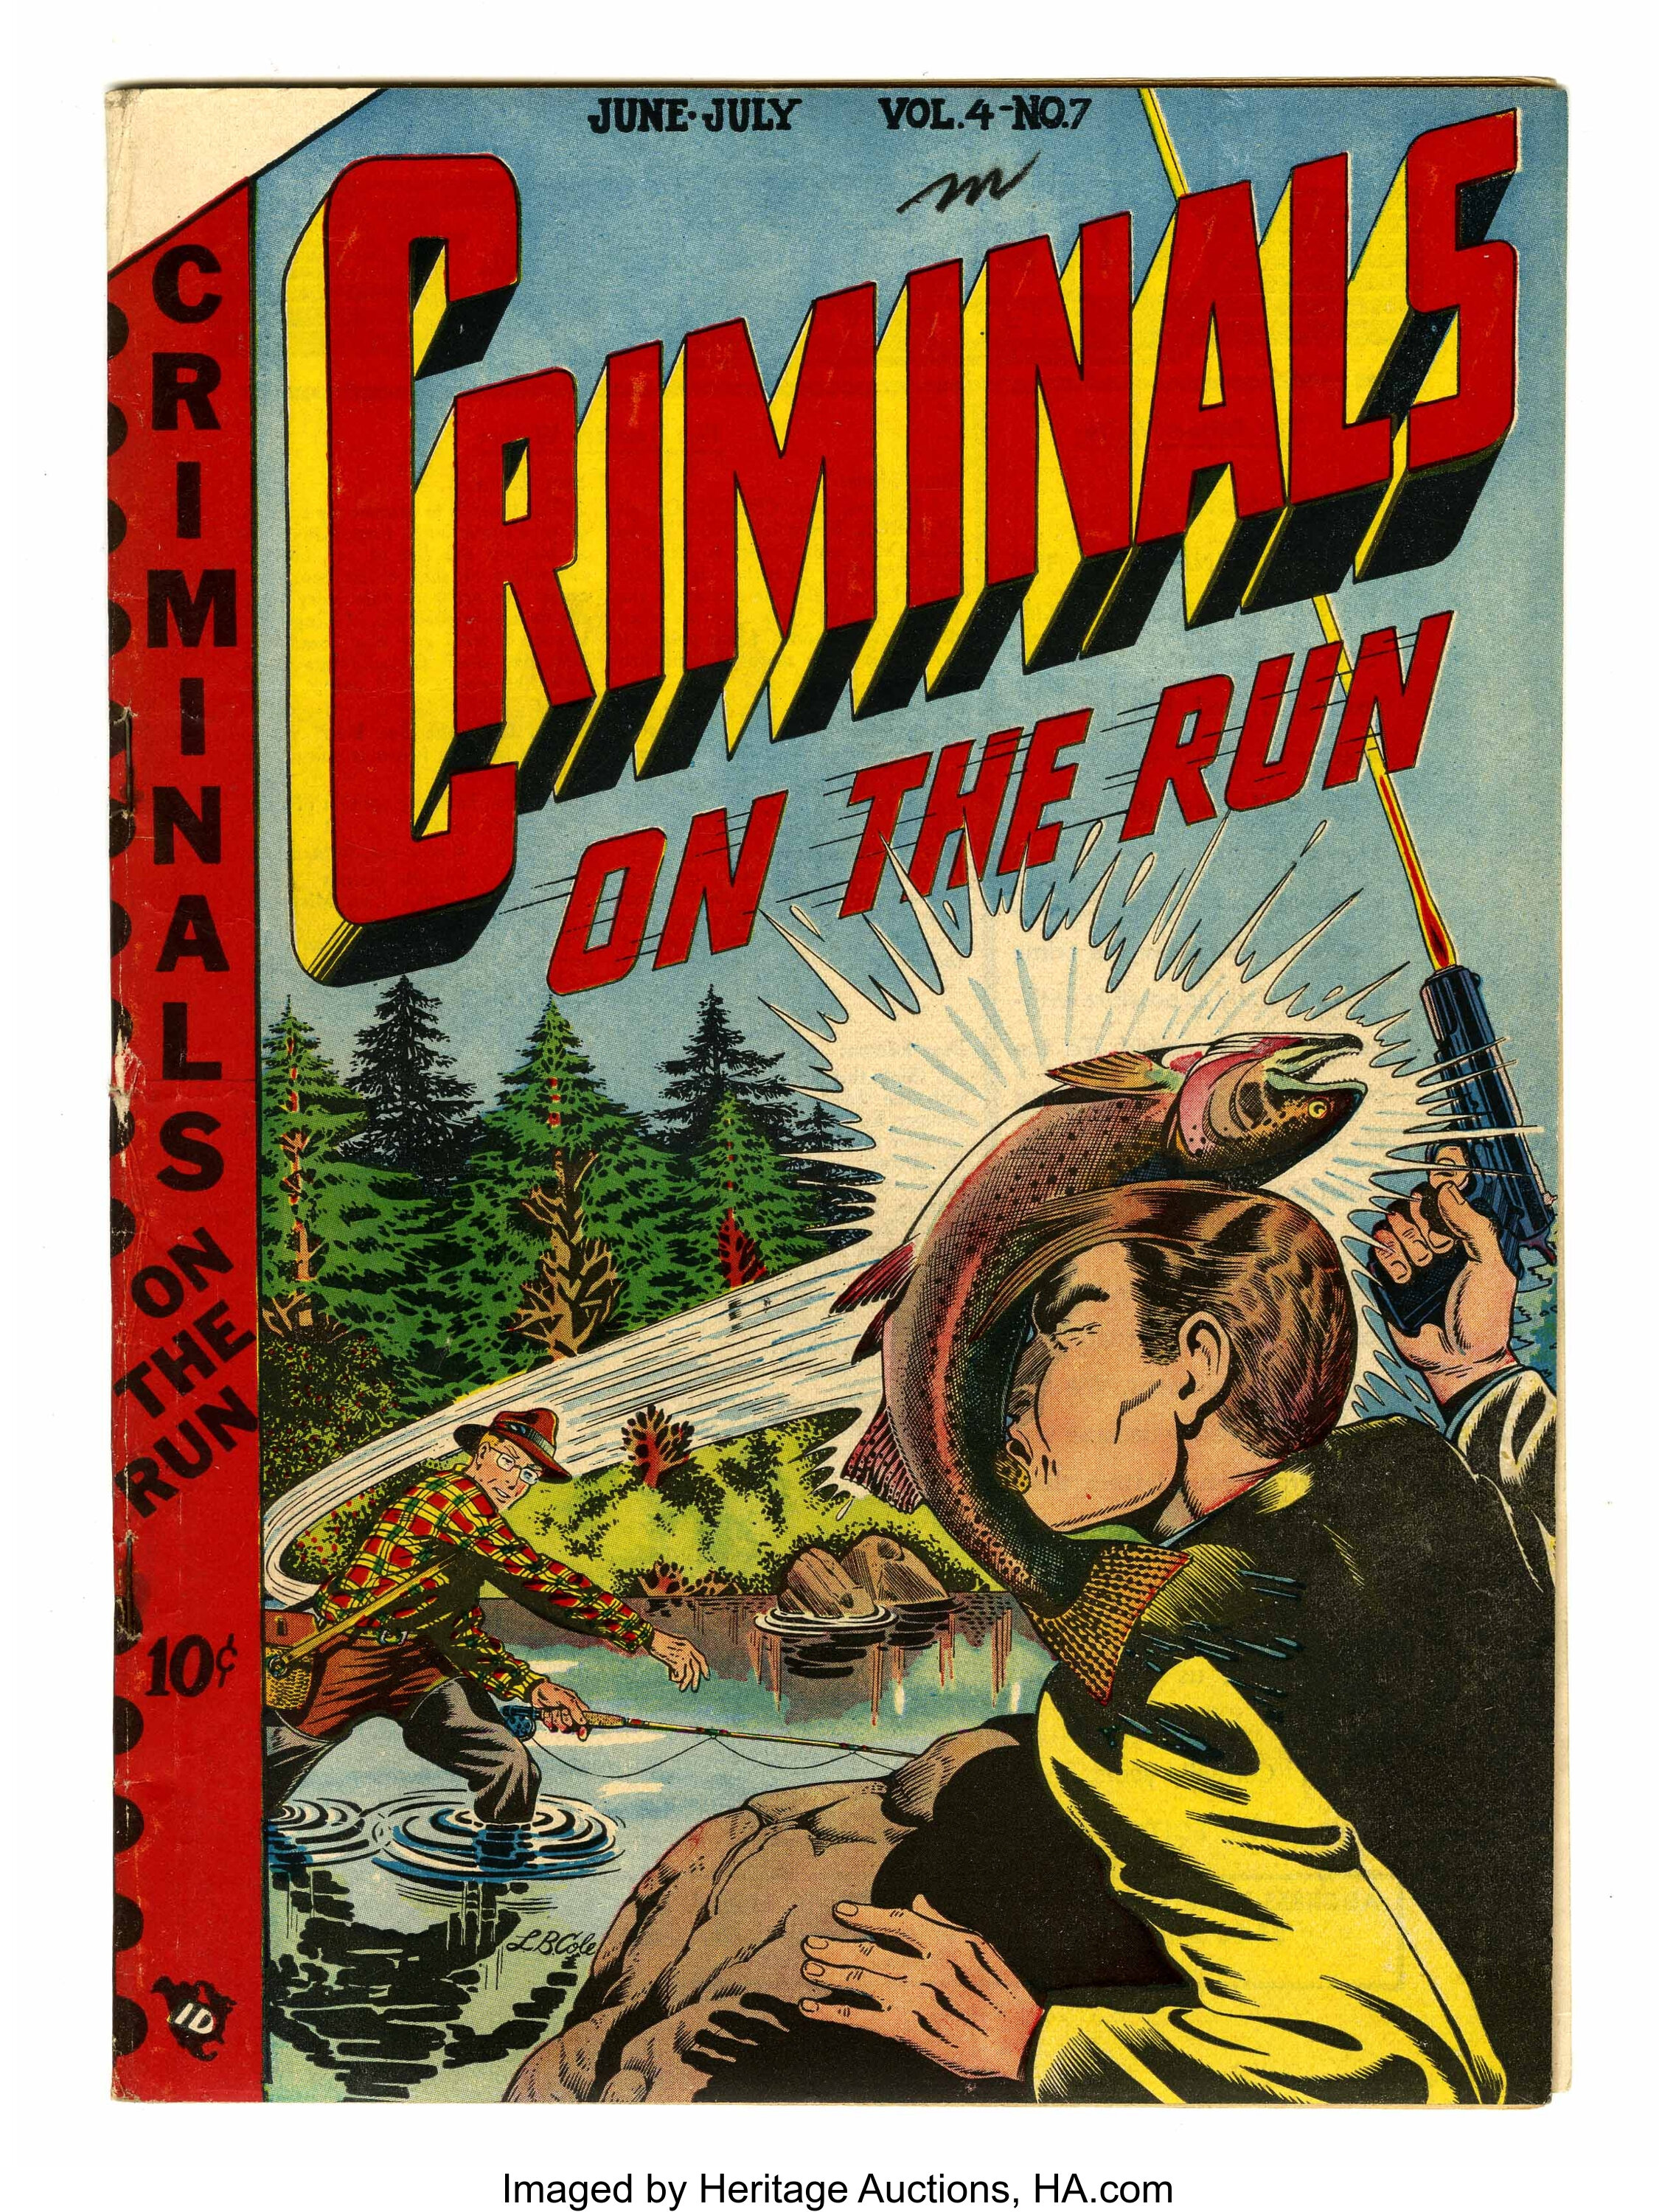 Criminals on the Run V4#7 Double Cover (Novelty Press, 1949) | Lot #14222 |  Heritage Auctions